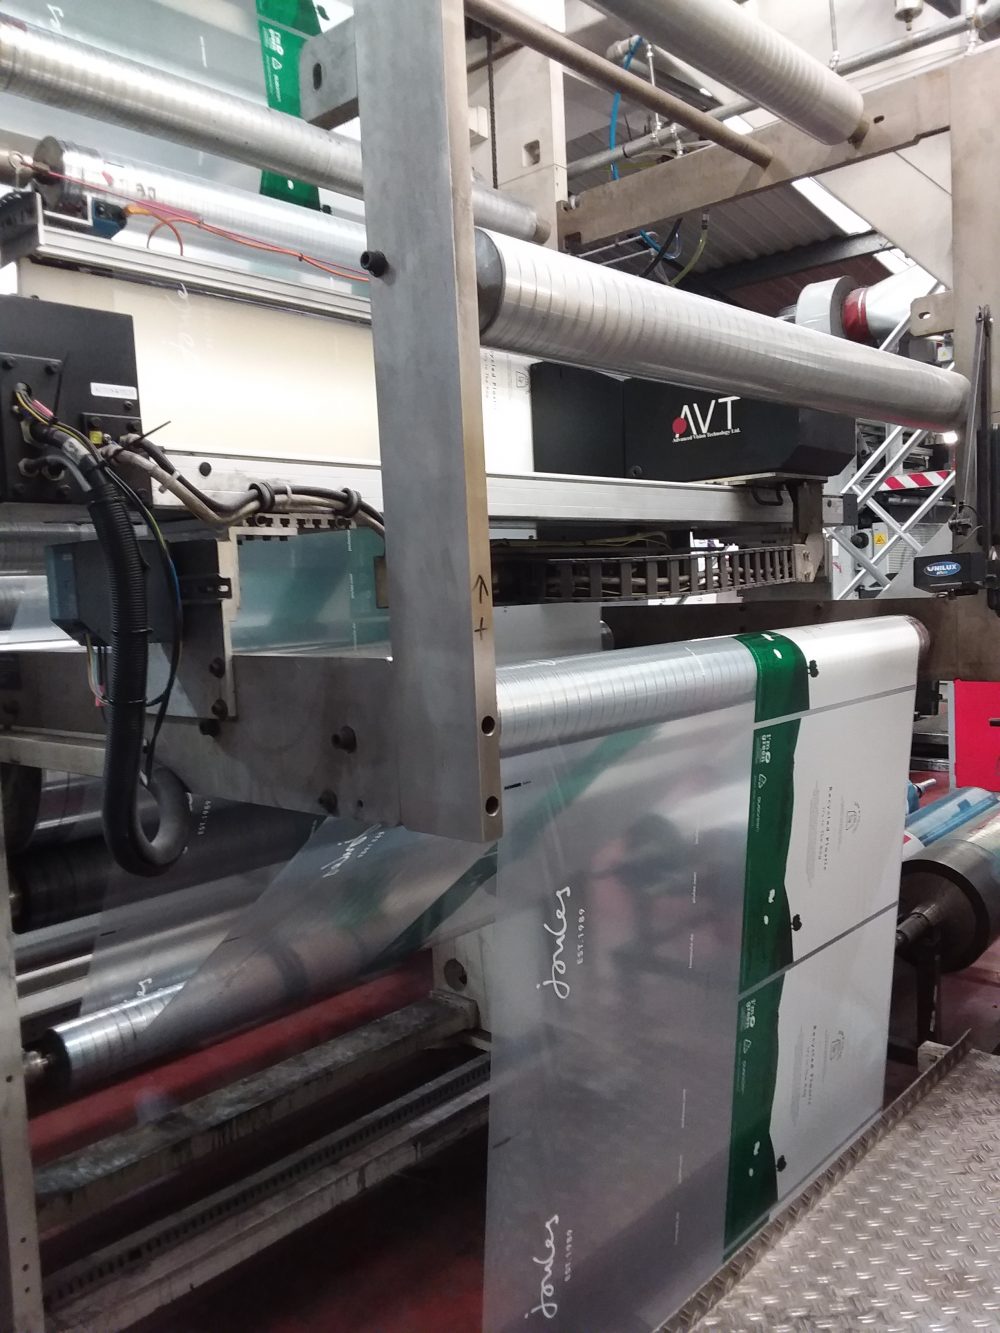 Joules Click and collect mailing bags on print machine